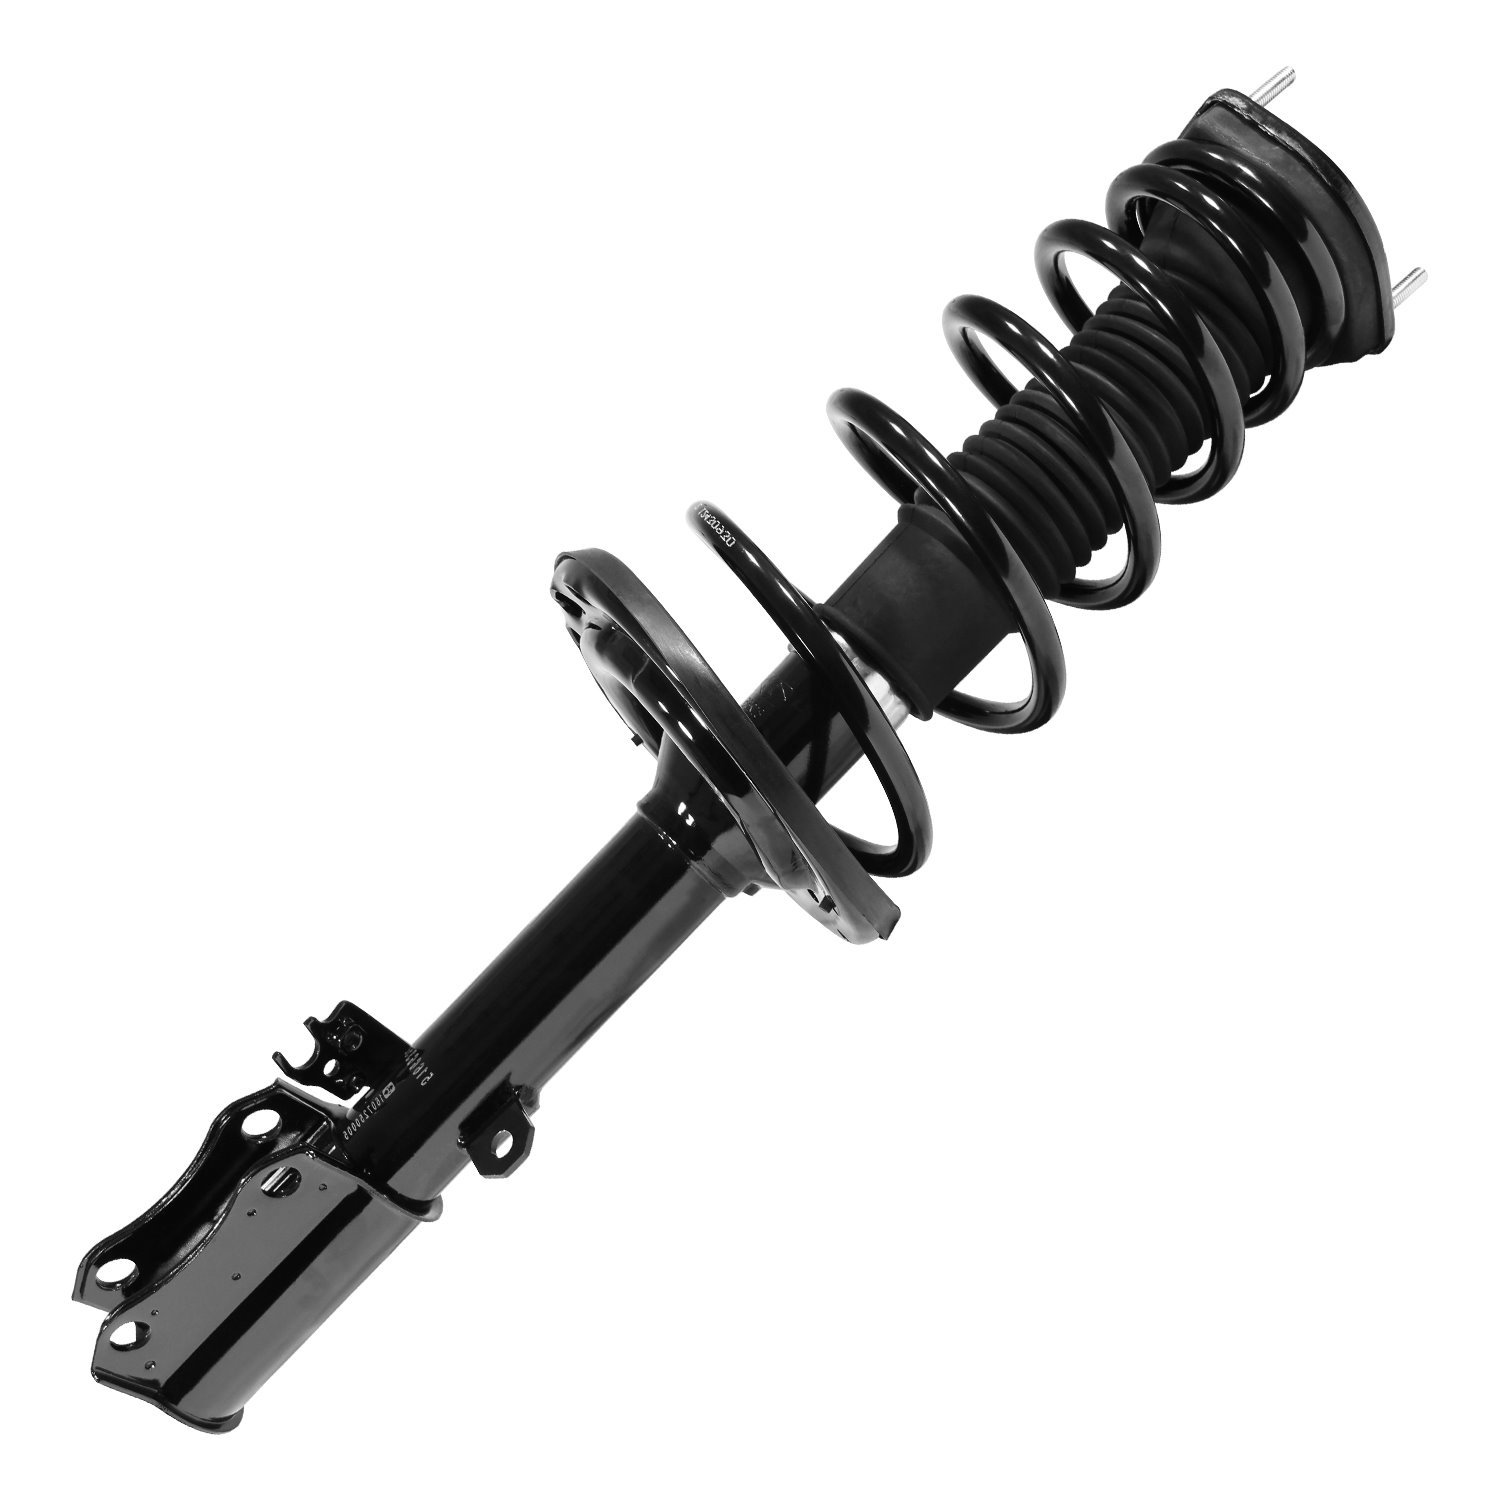 15351 Suspension Strut & Coil Spring Assembly Fits Select Lexus ES330, Toyota Camry, Toyota Solara